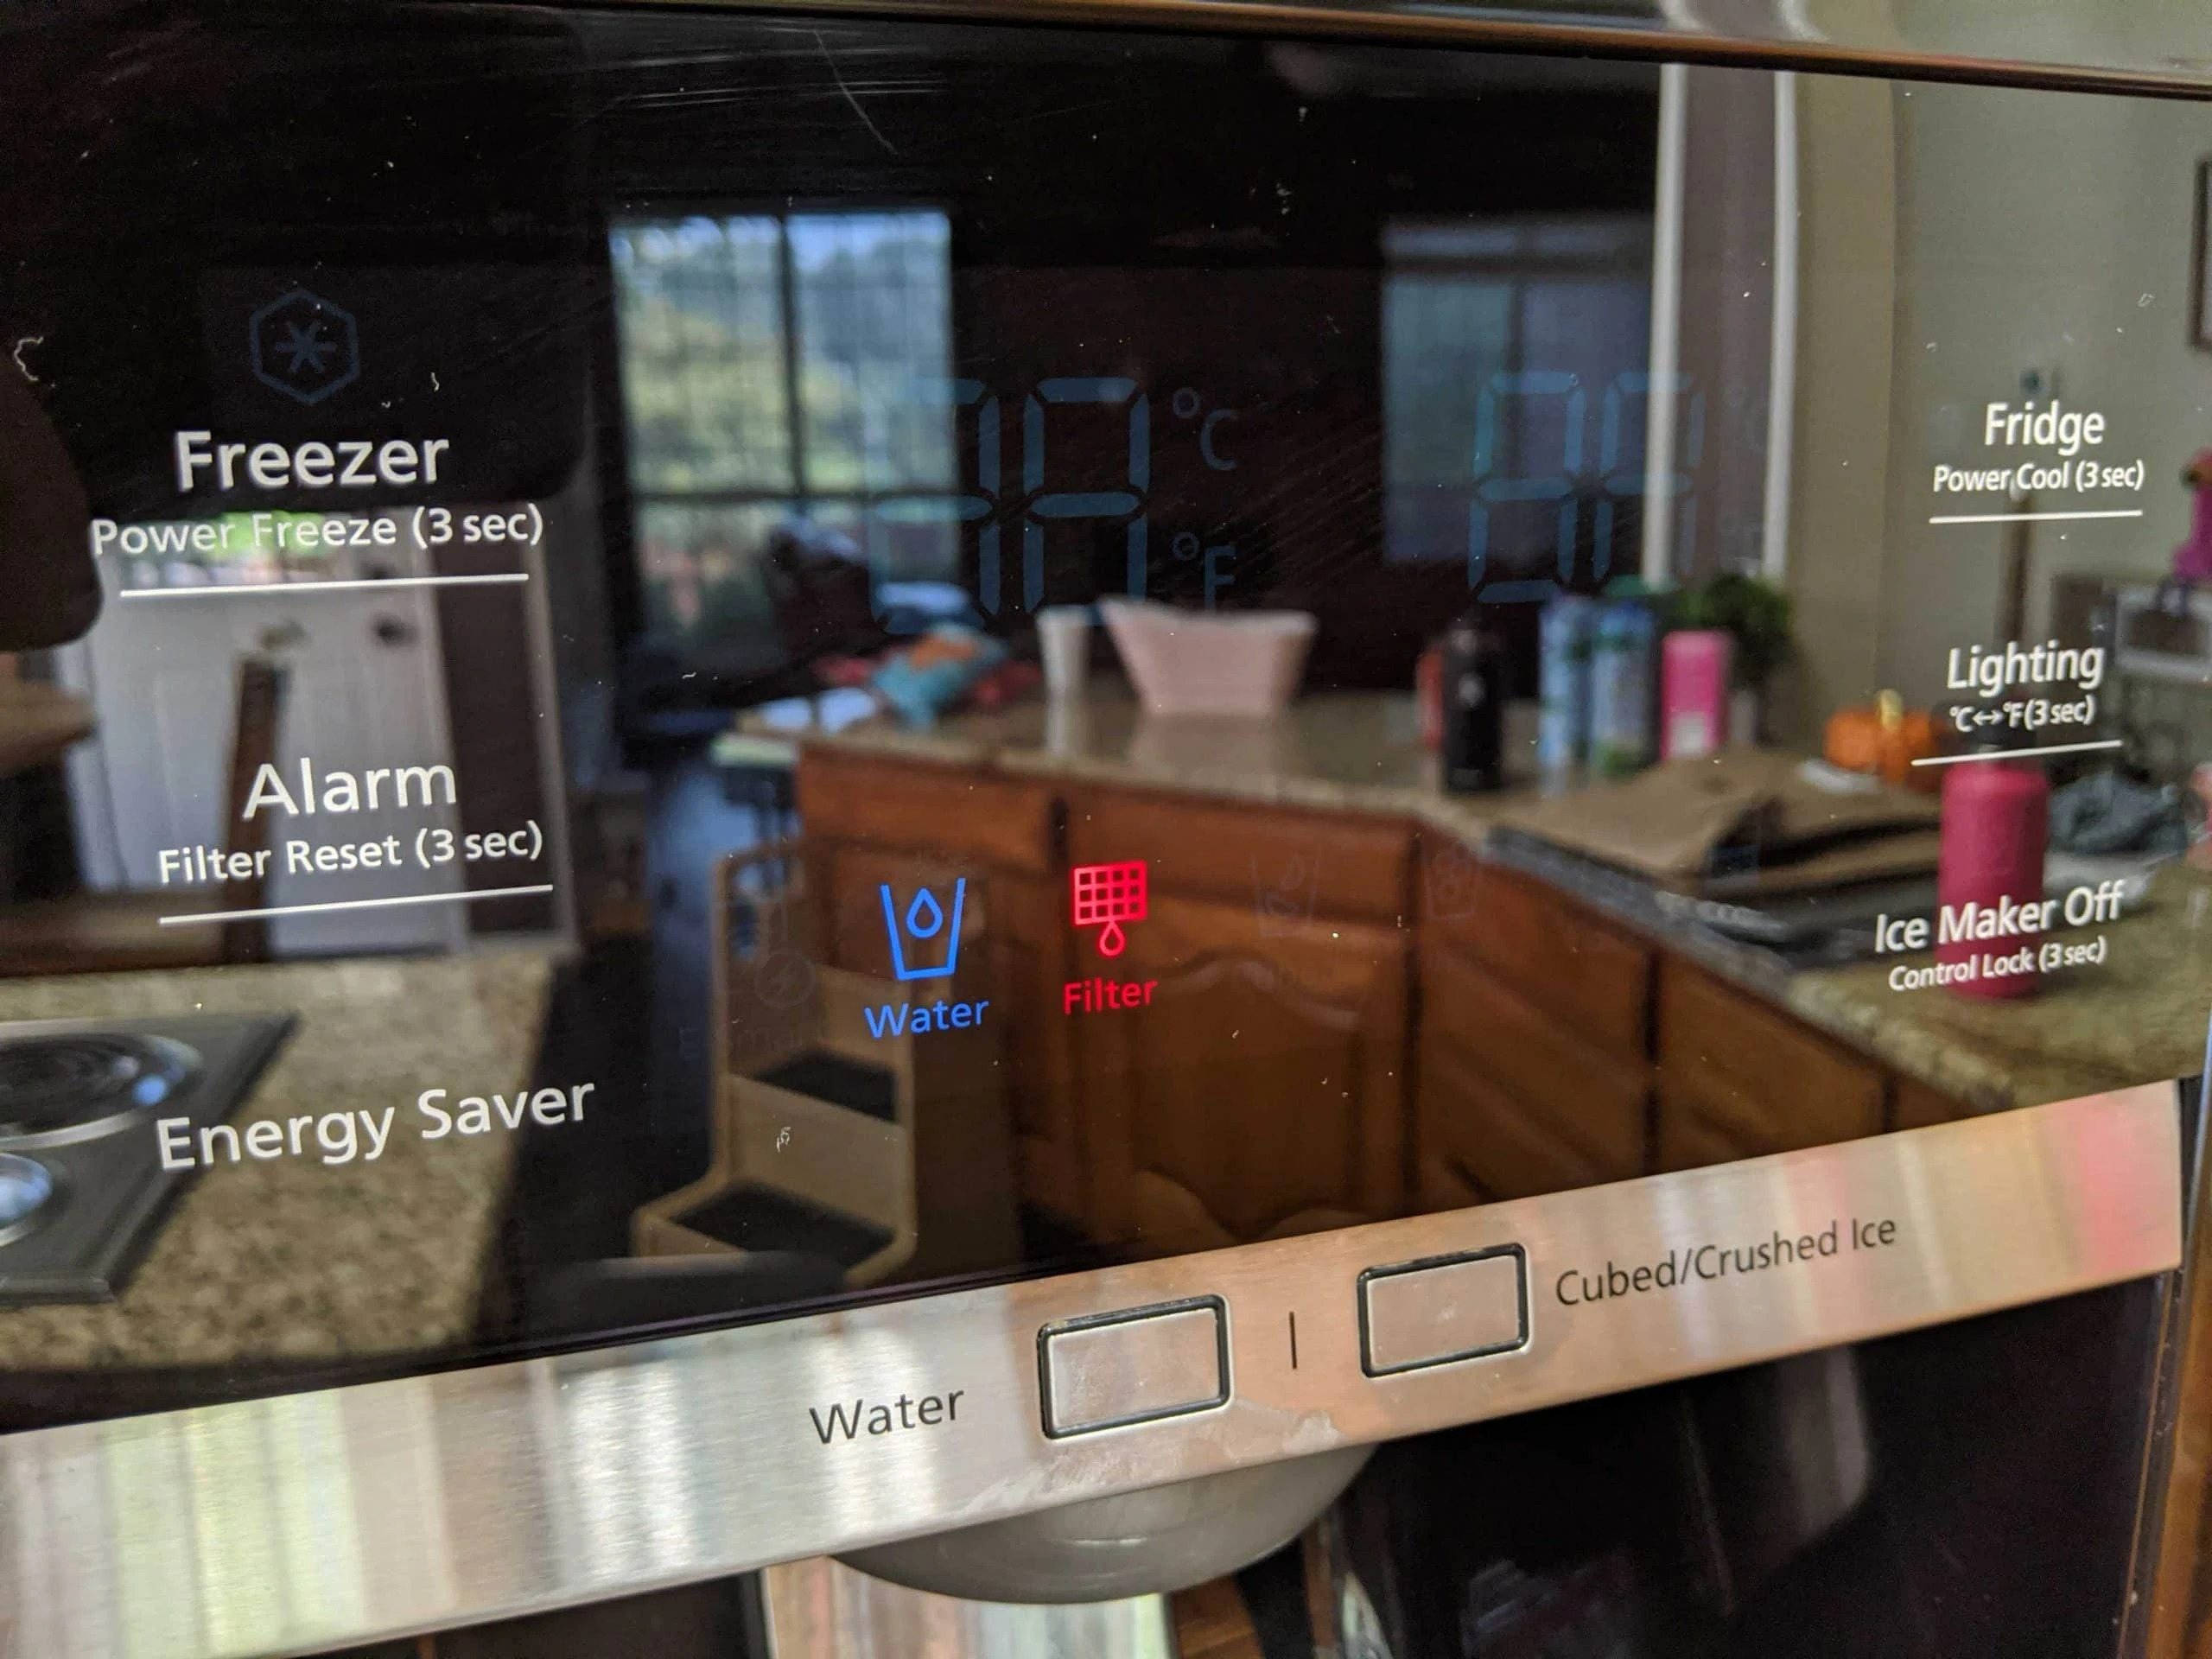 How To Reset The Filter Light On A Samsung Refrigerator